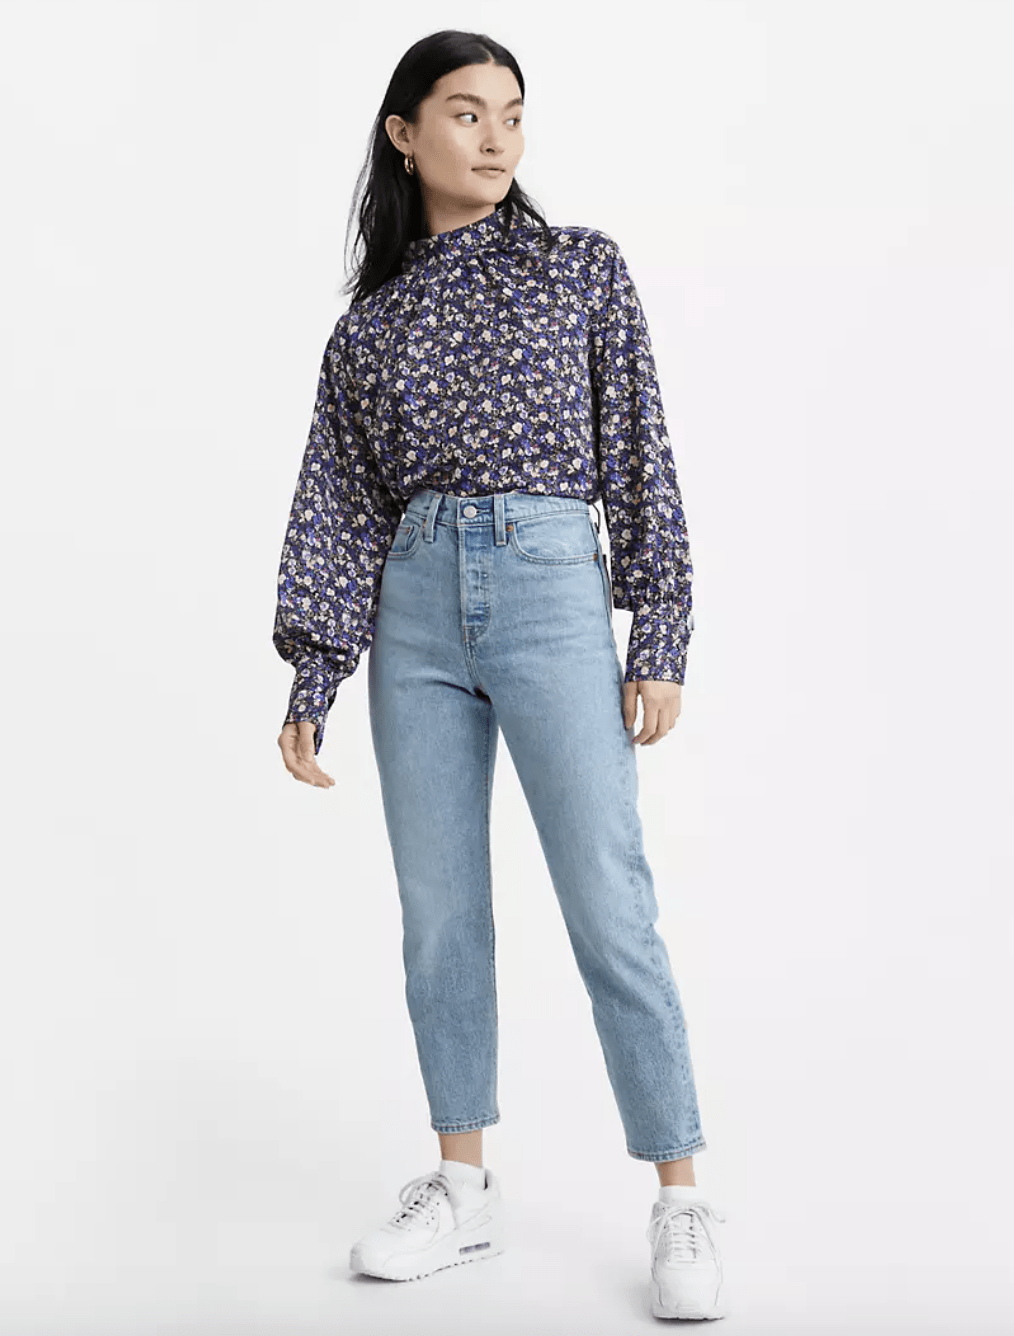 tro på træfning Nuværende The best mom jeans of 2021: Mom jeans that go with every outfit